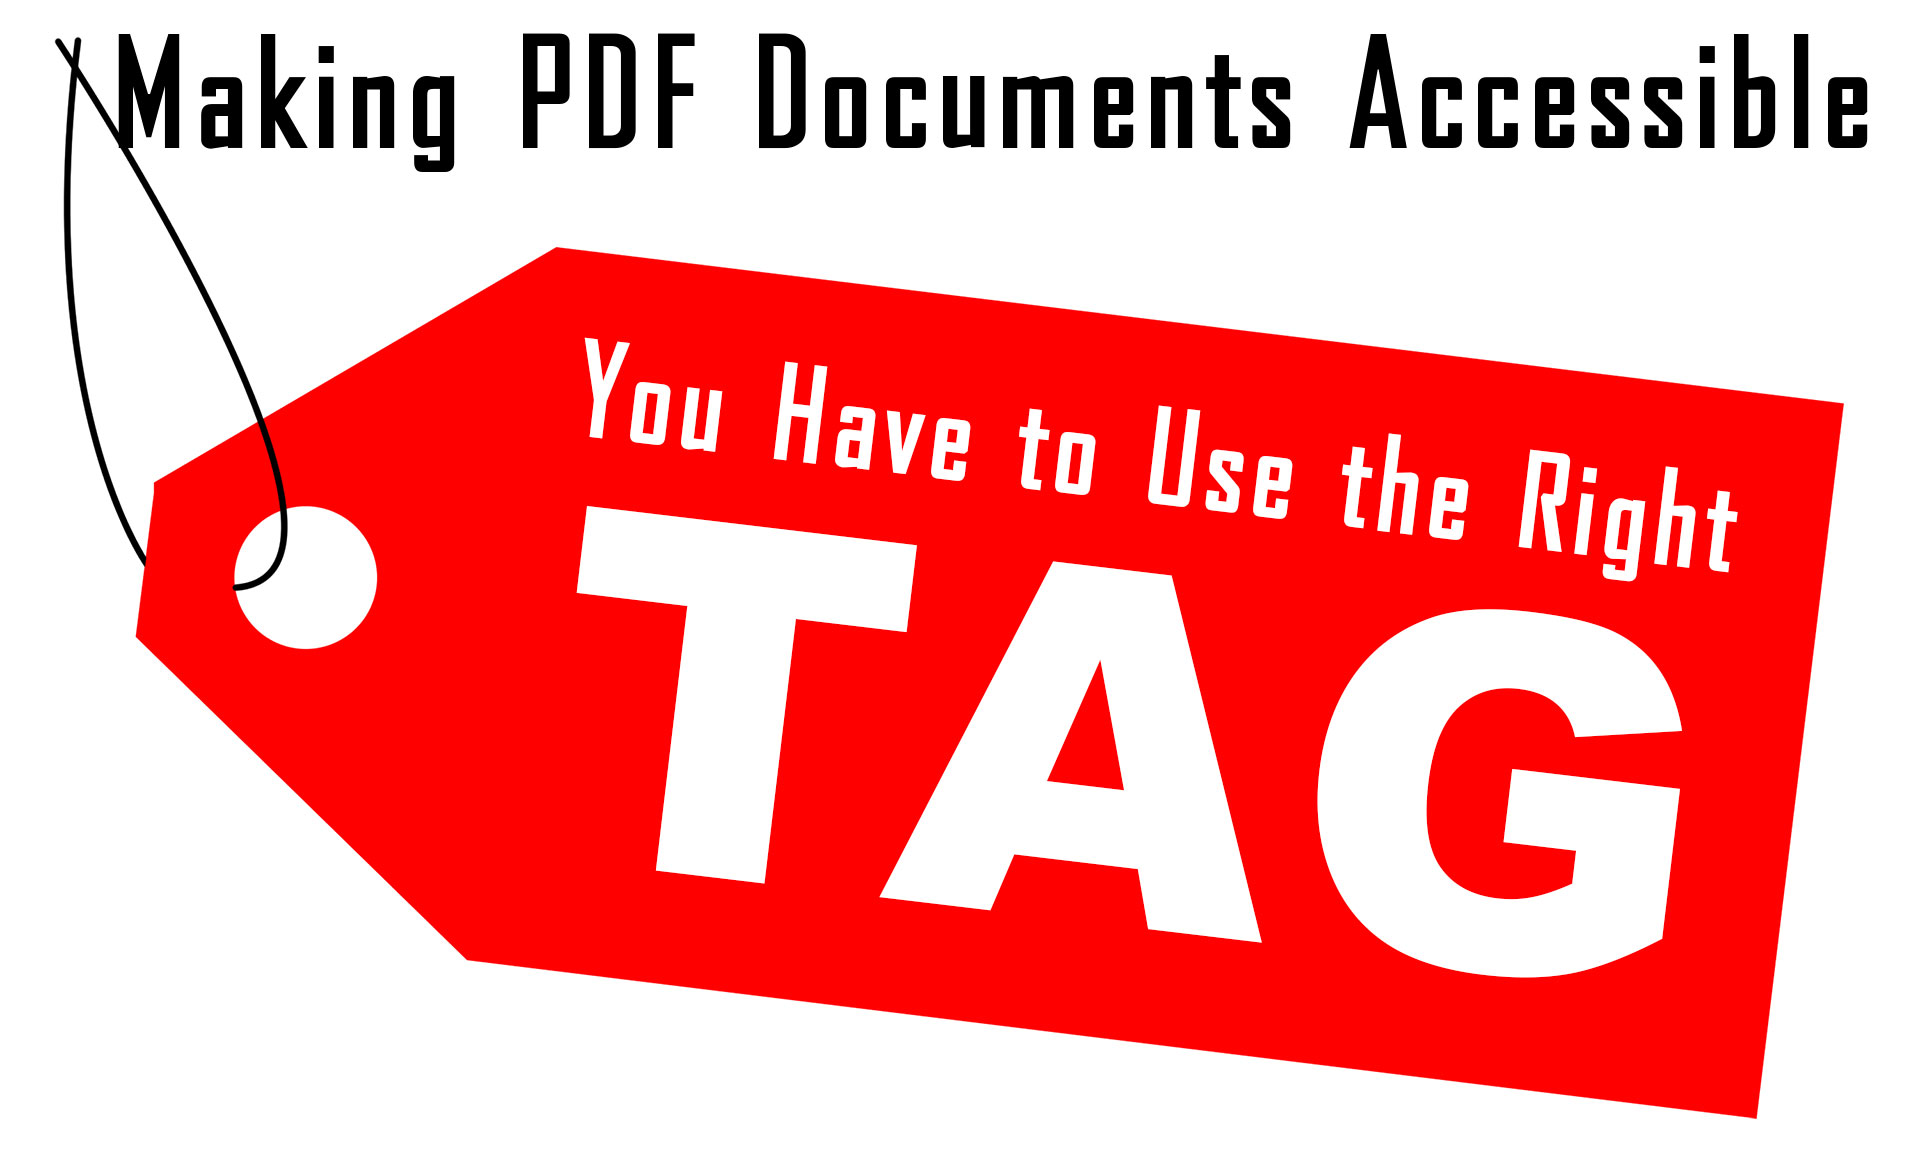 You have to use the right tag to make documents accessible.